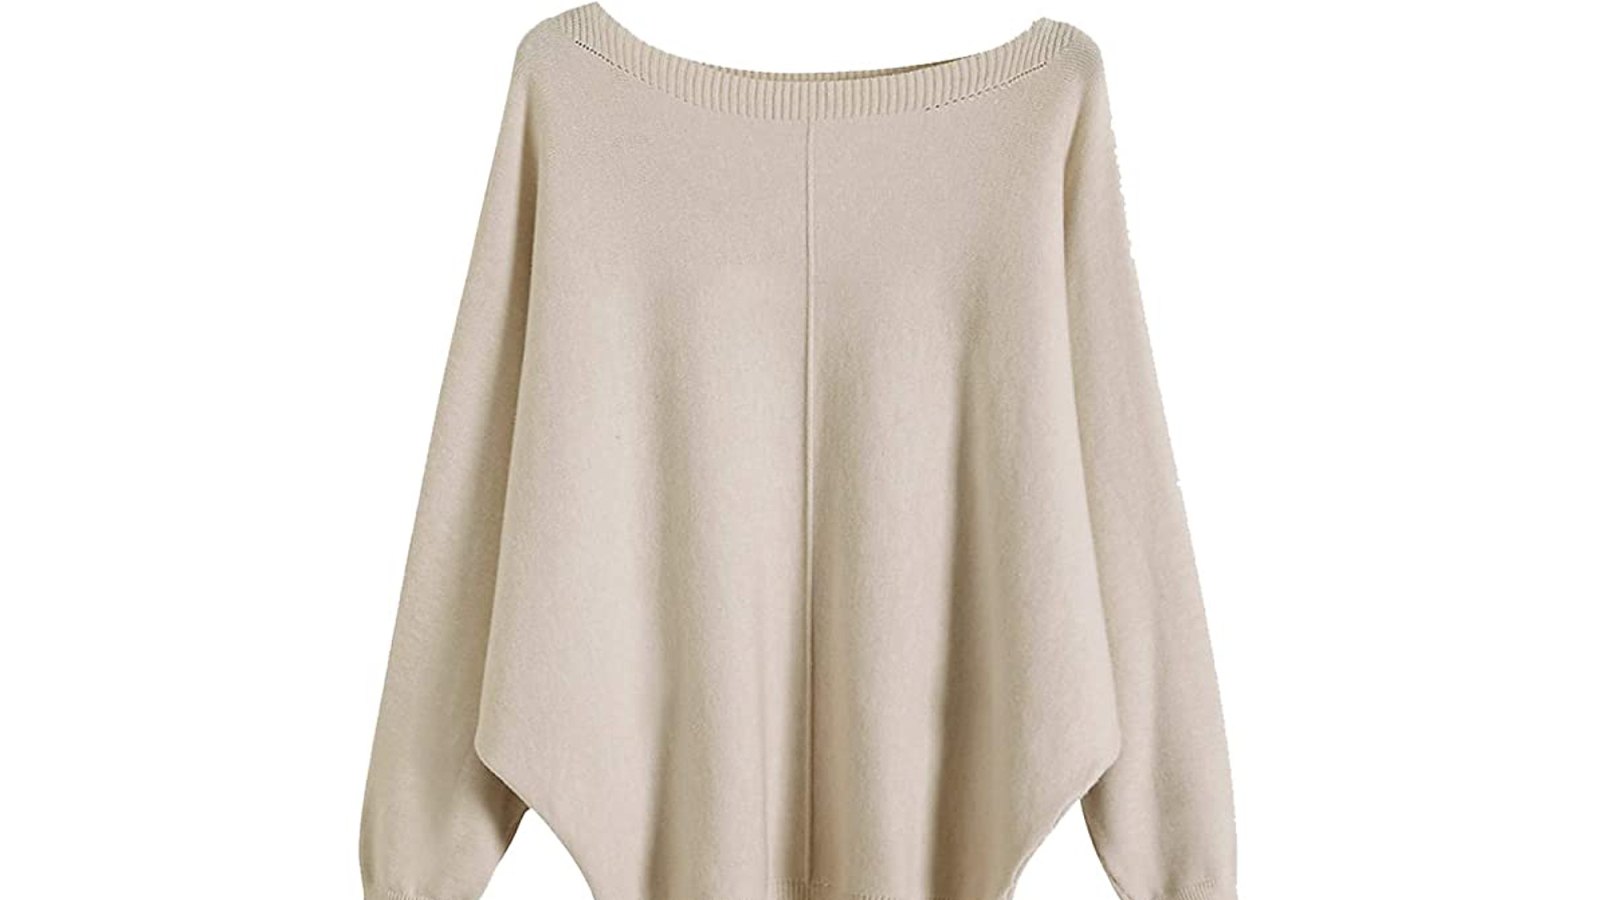 GABERLY Boat Neck Batwing Sleeves Dolman Knitted Sweater